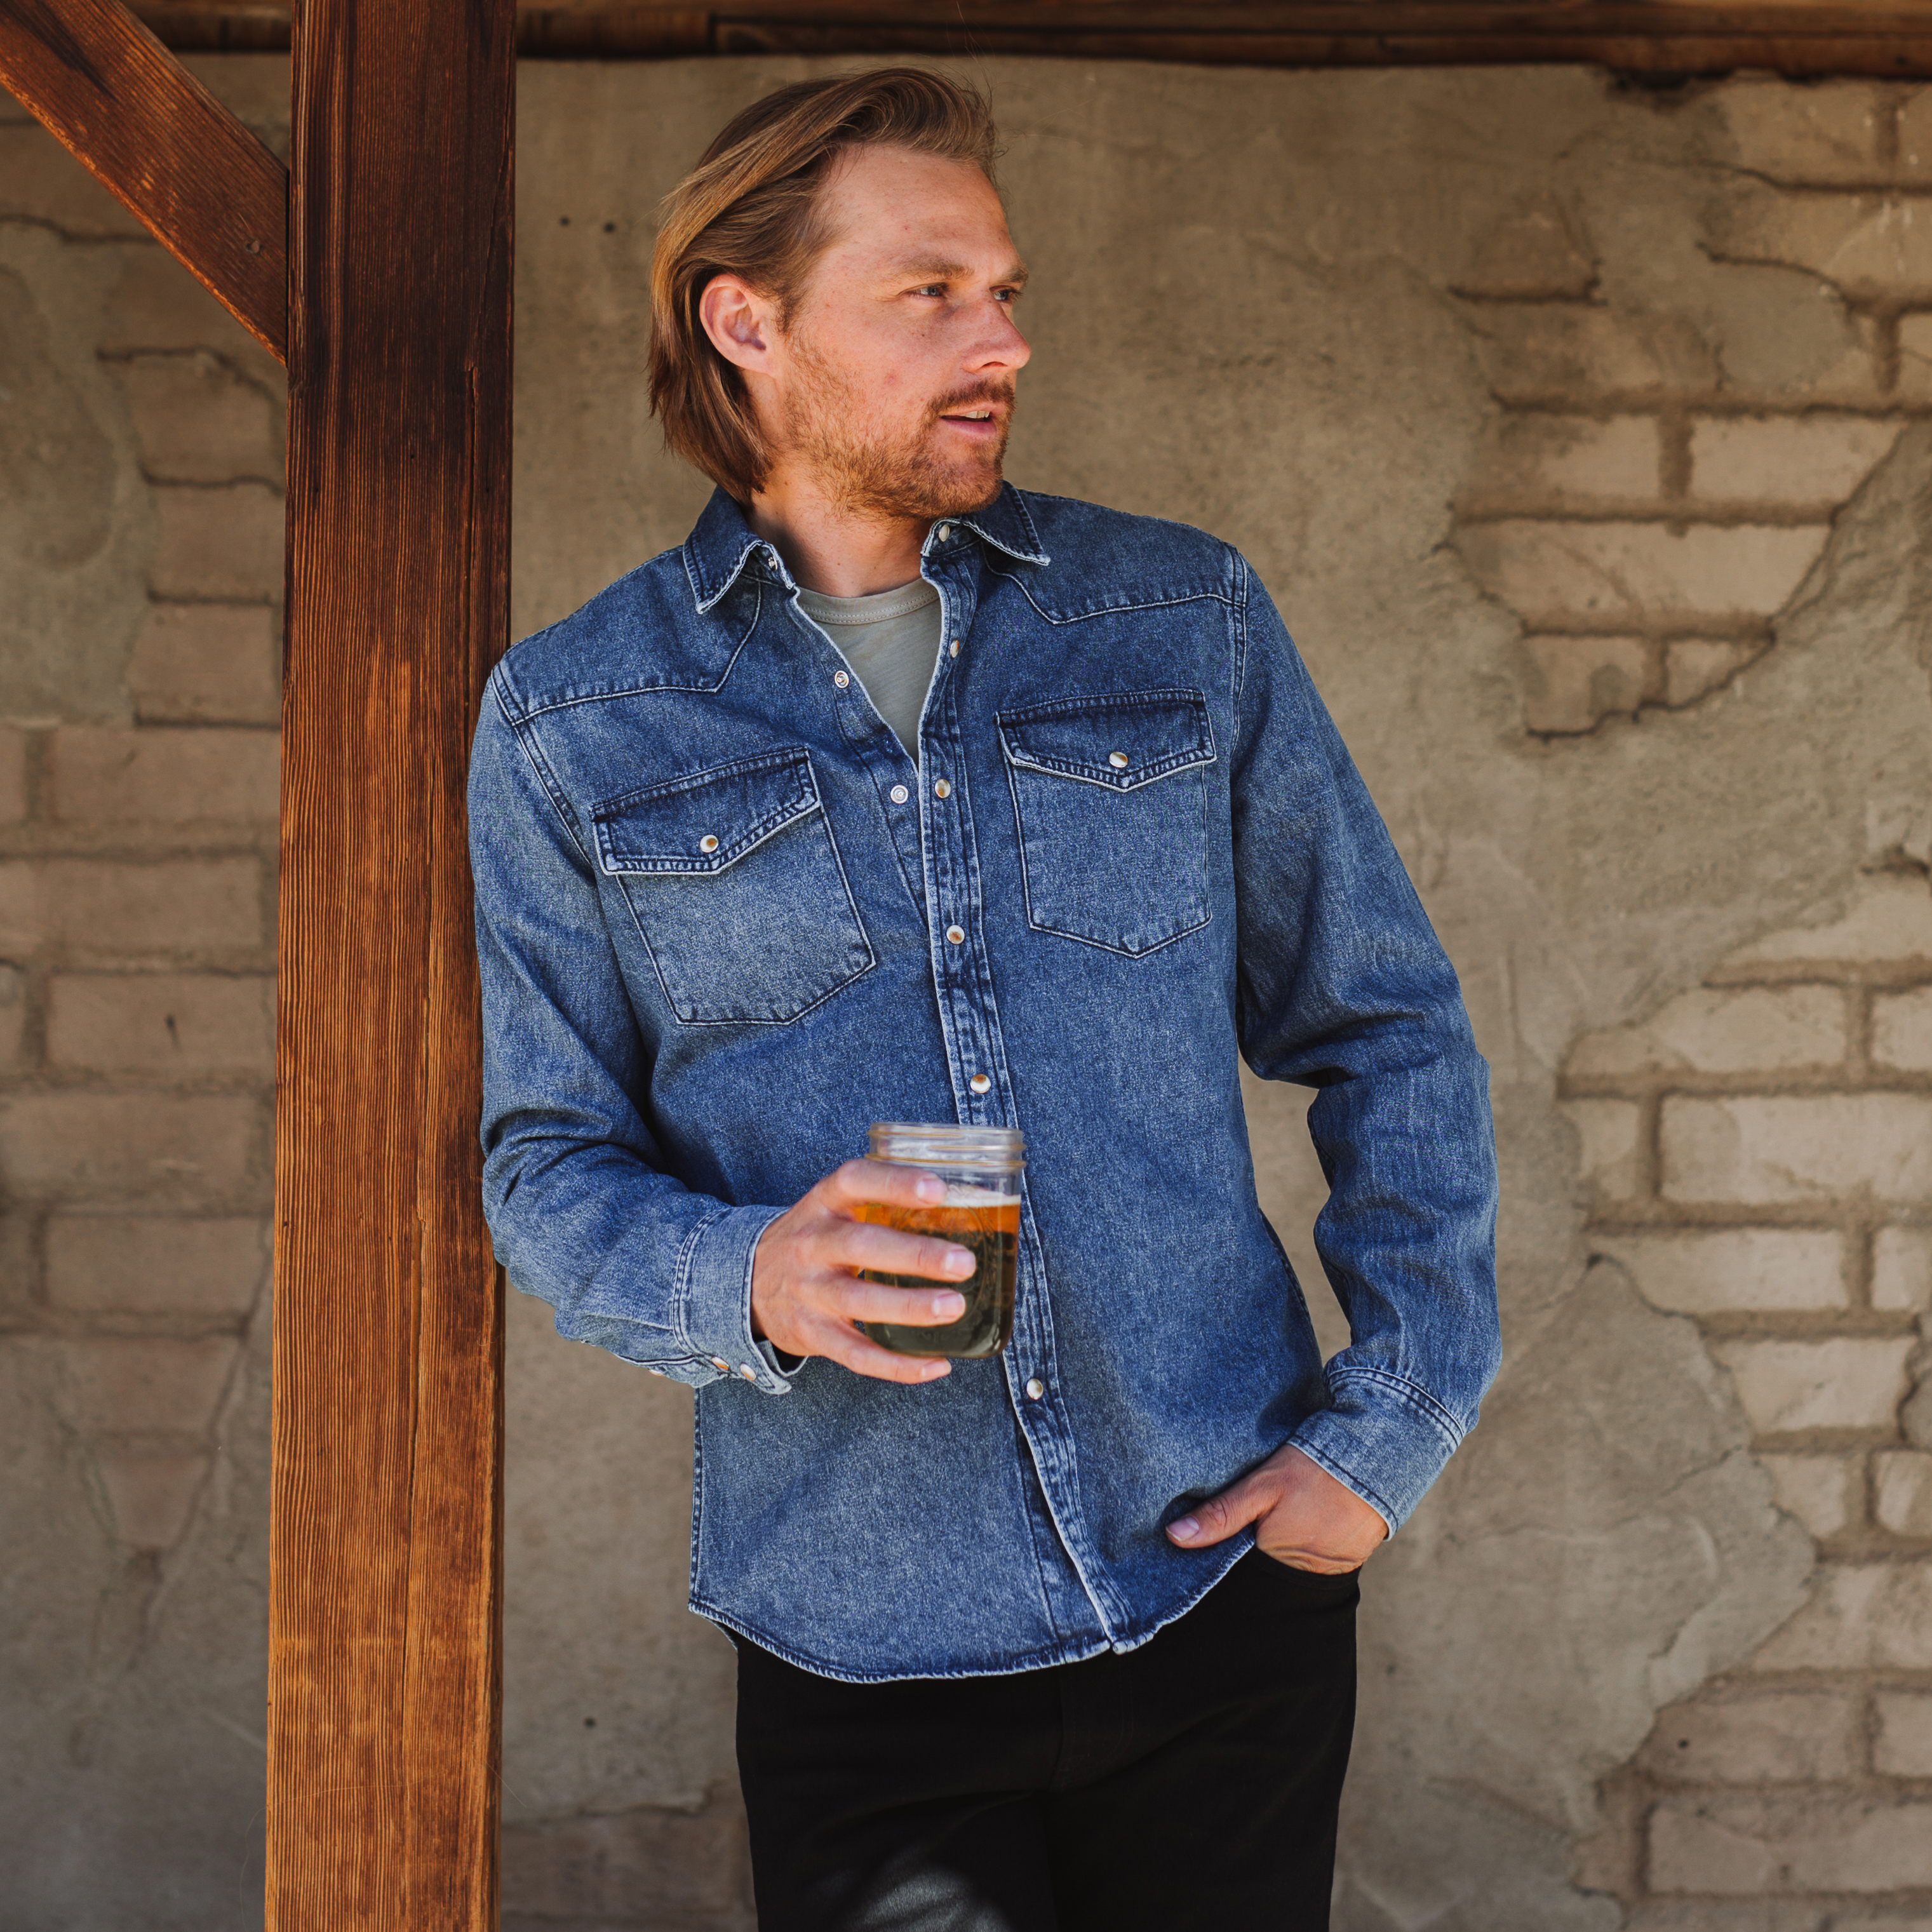 Men's New Arrivals - Trending Clothes & Styles | Lucky Brand